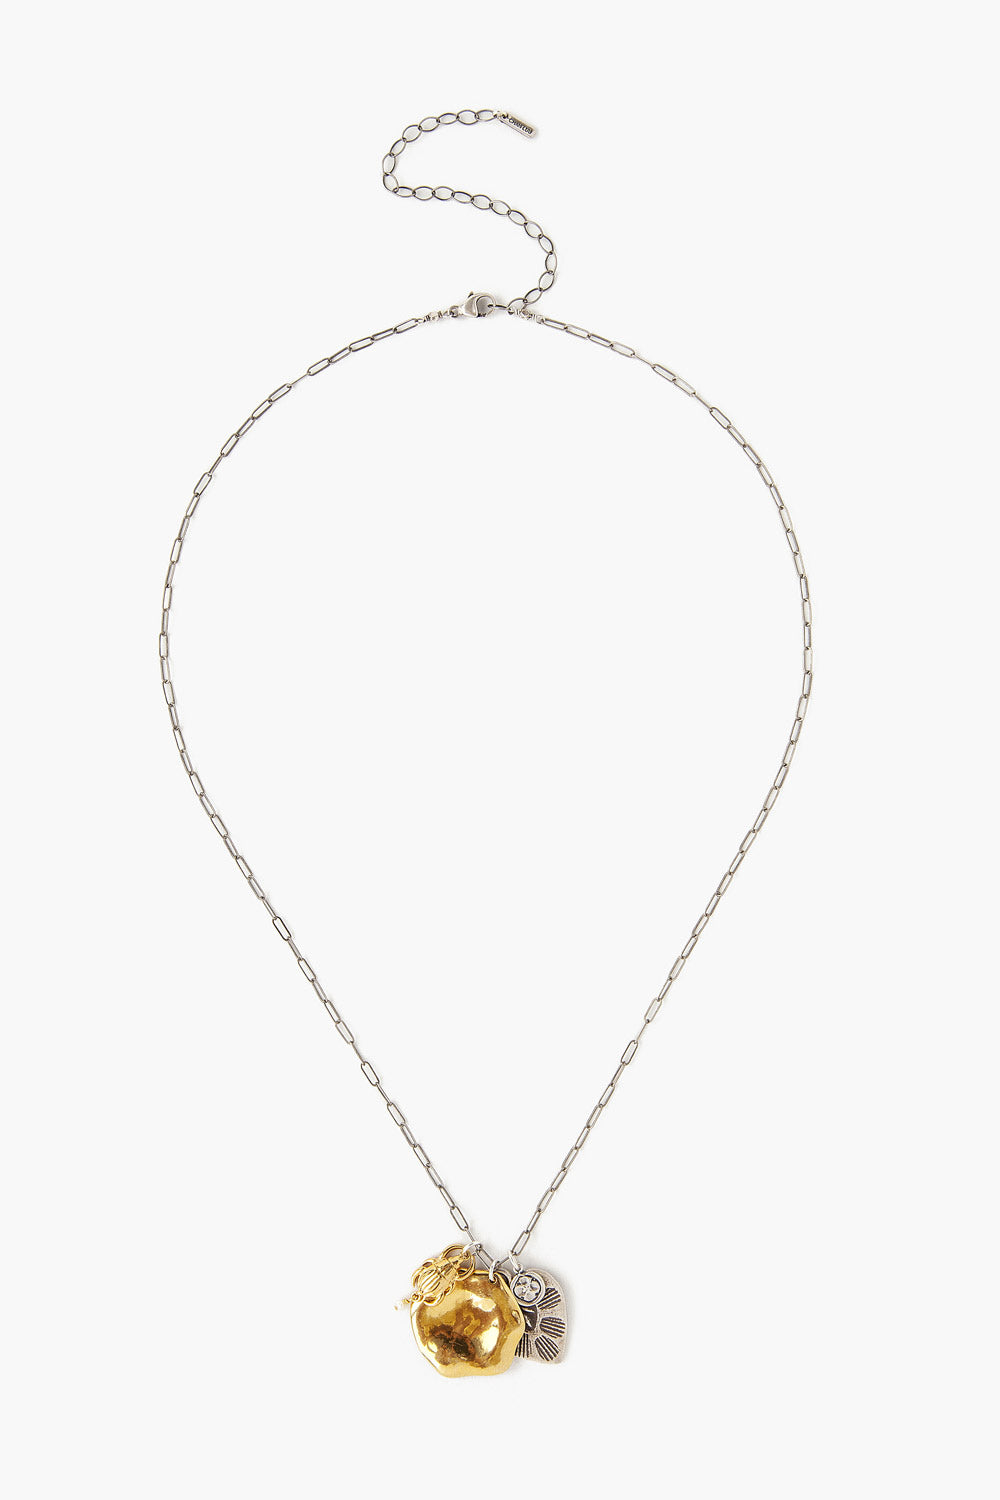 Chan Luu Silver and Gold mix charm necklace